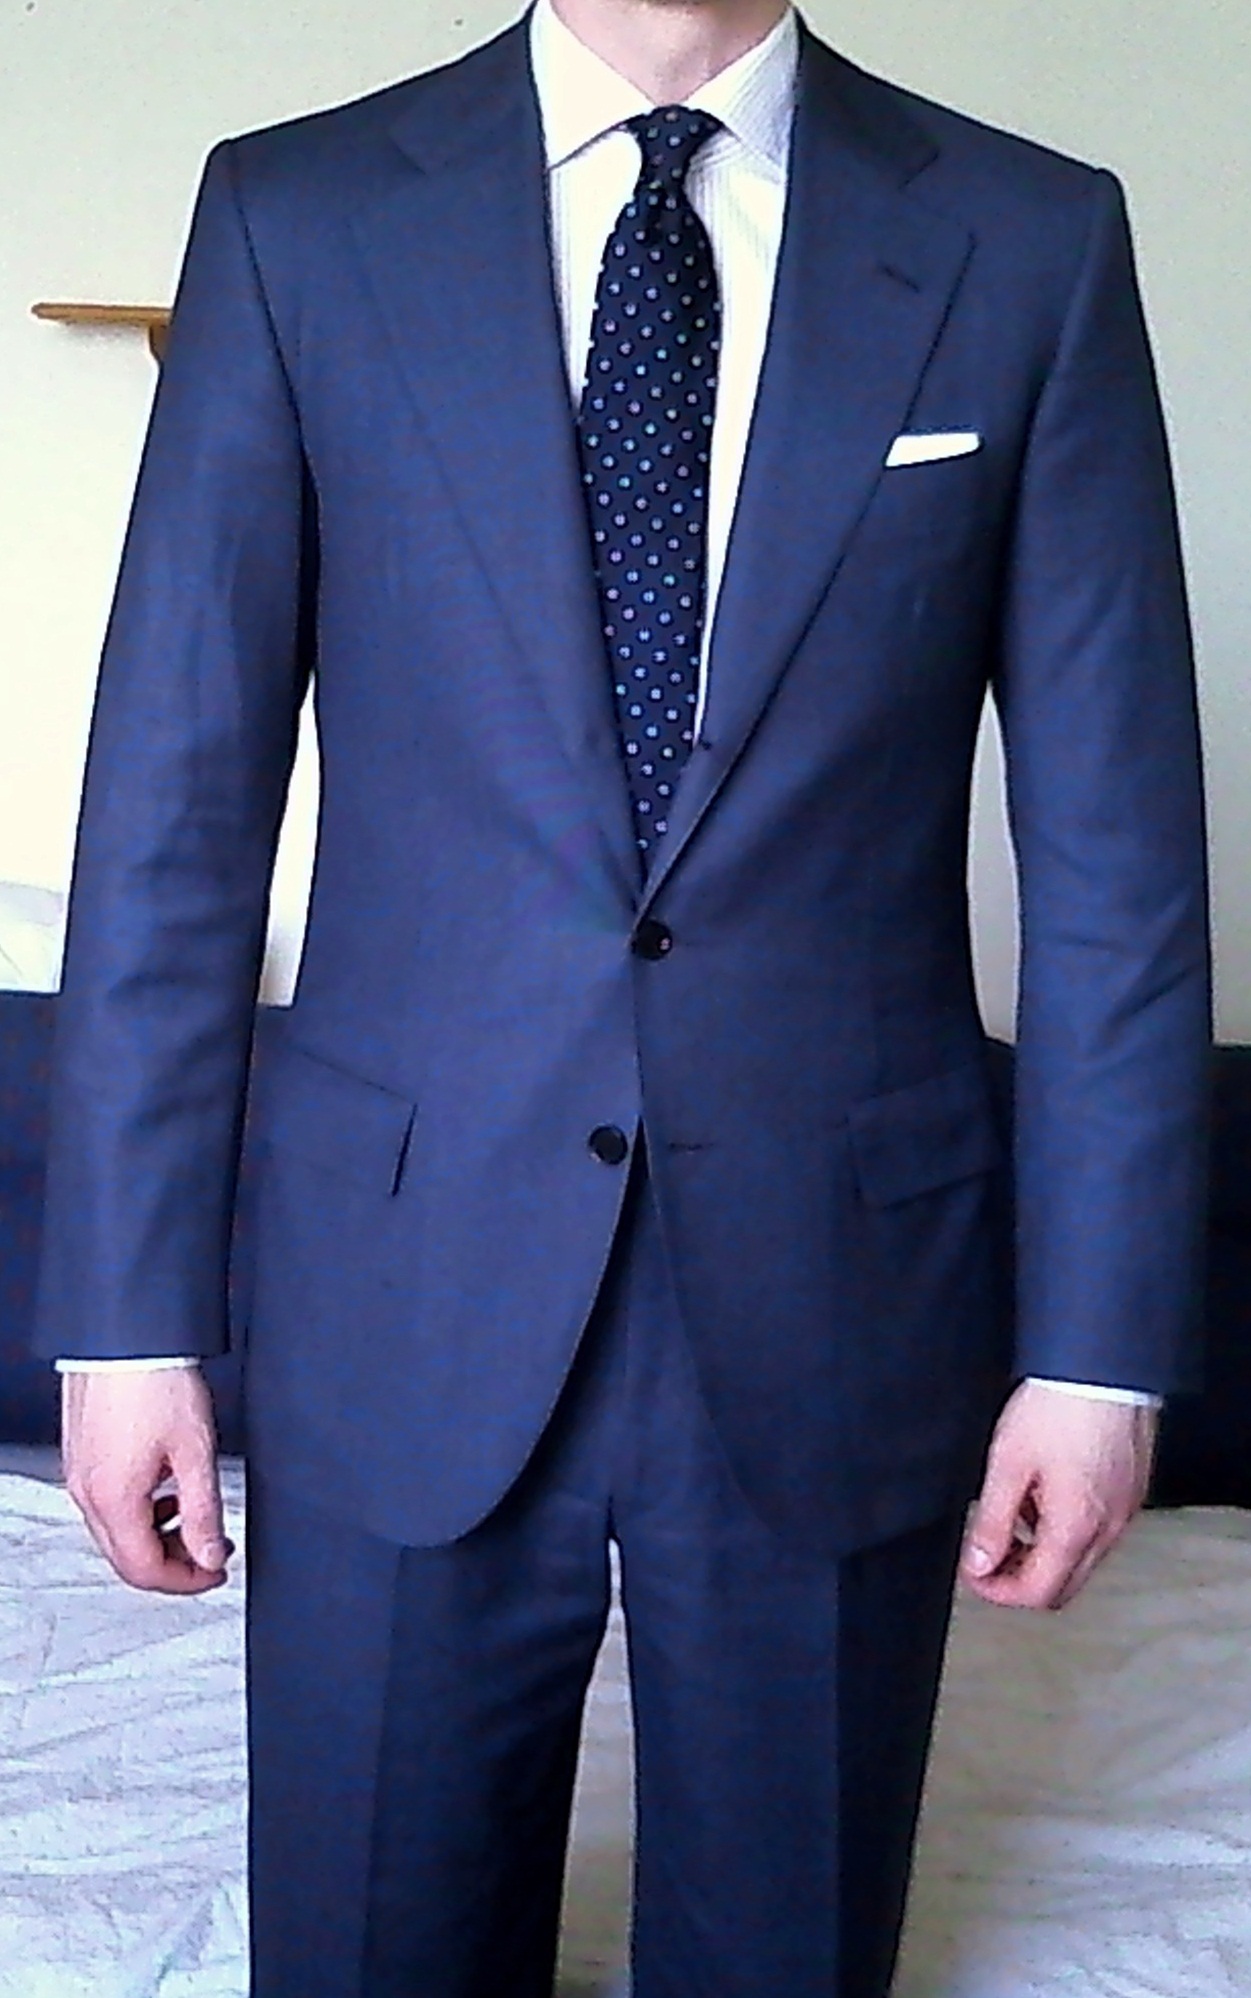 Picked up this navy Loro Piana suit on Ebay. Does it look dated